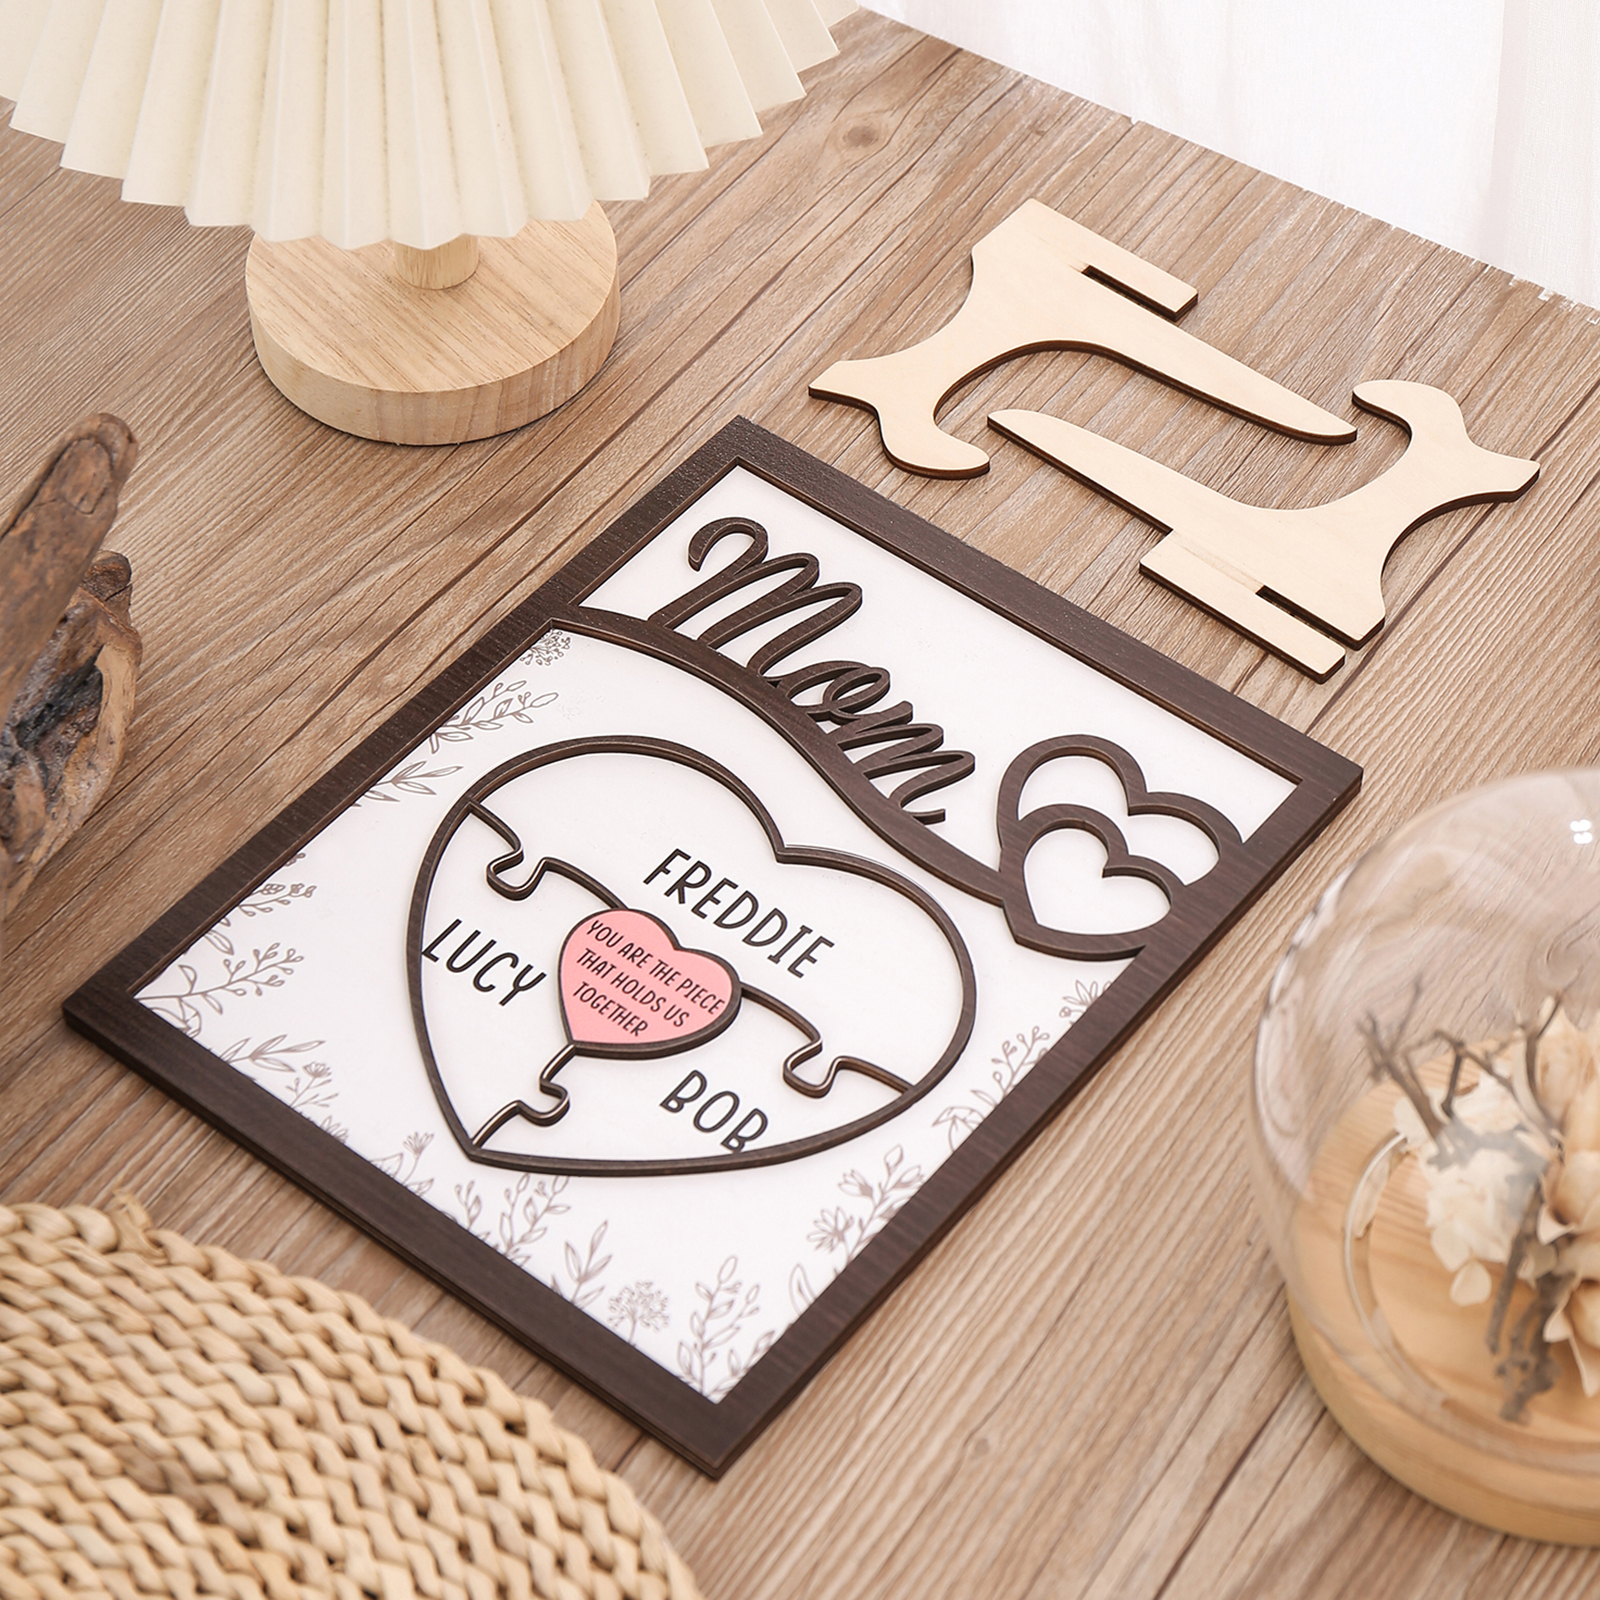 3 Names - Personalized Home Frame Wooden Decoration Customizable with 2 Texts, Love Pieces Wooden Board Painting for Mom